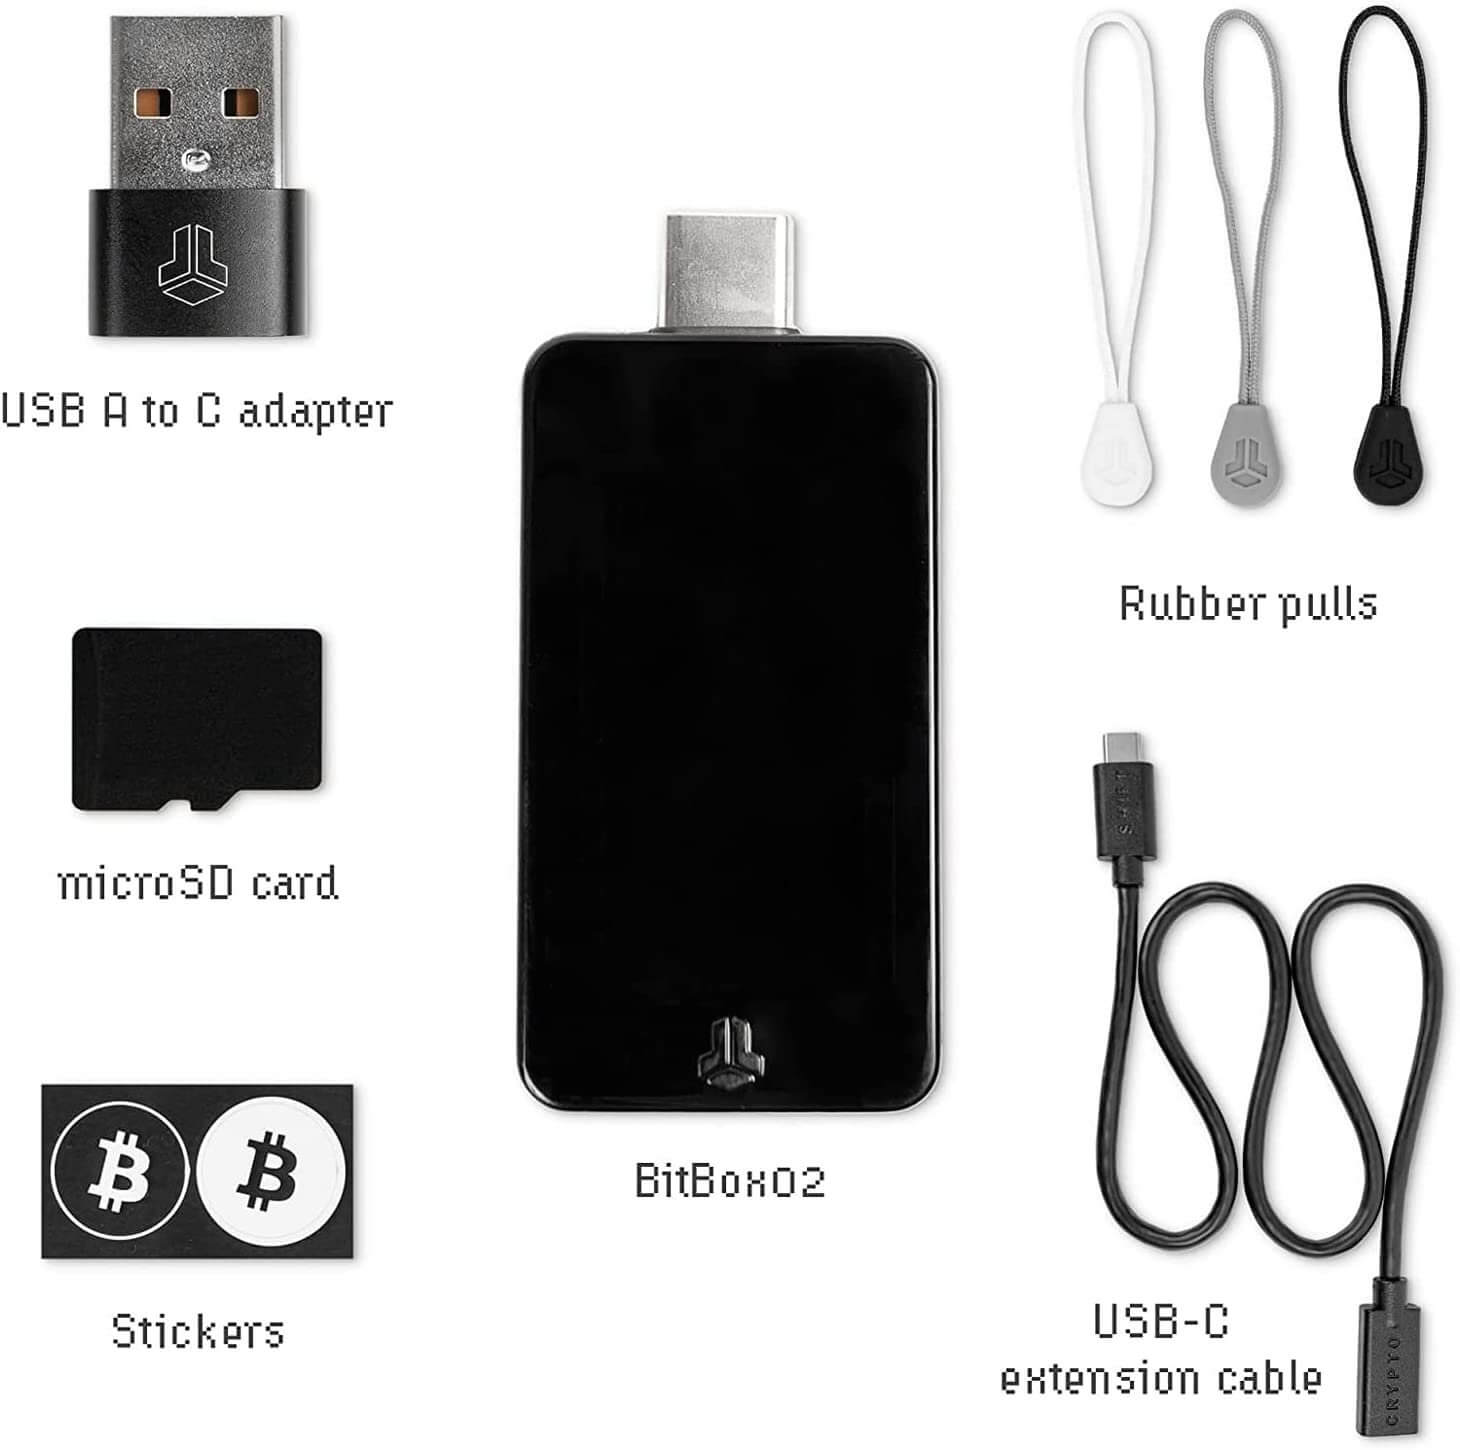 Items included in the box of a BitBox02 hardware wallet package.